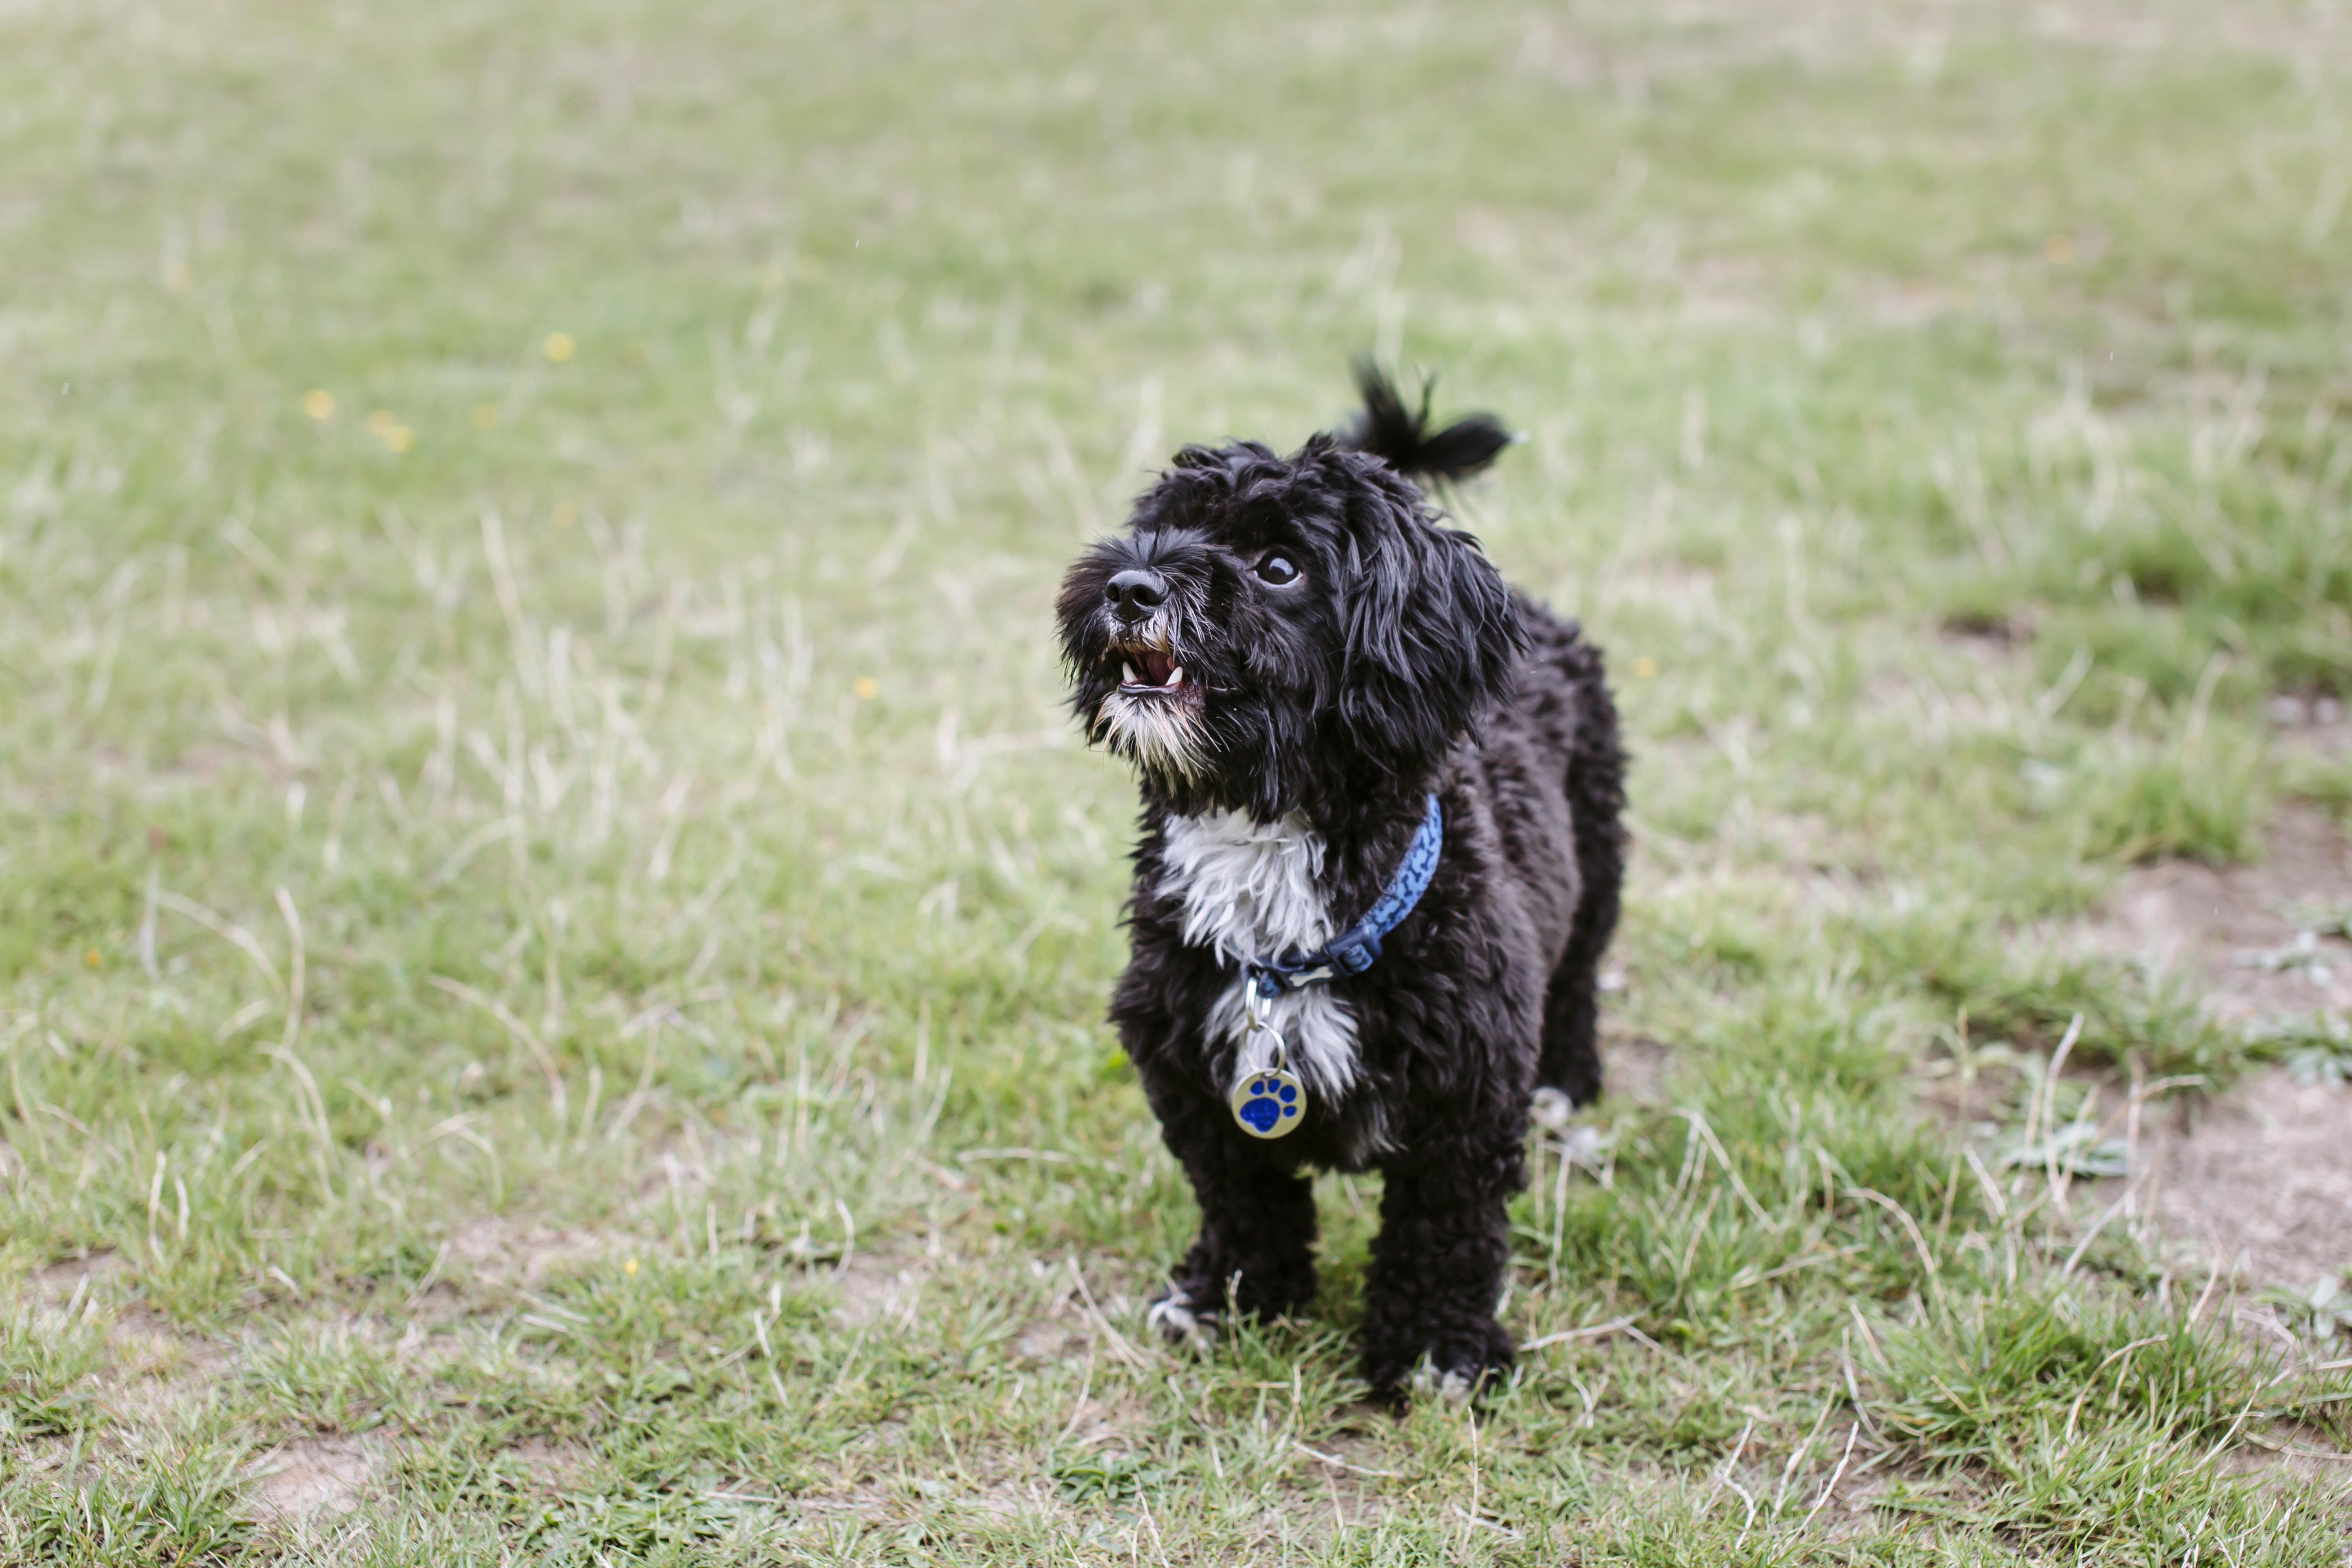 Black shih tzu cross Yorkshire terrier about to bark at owner